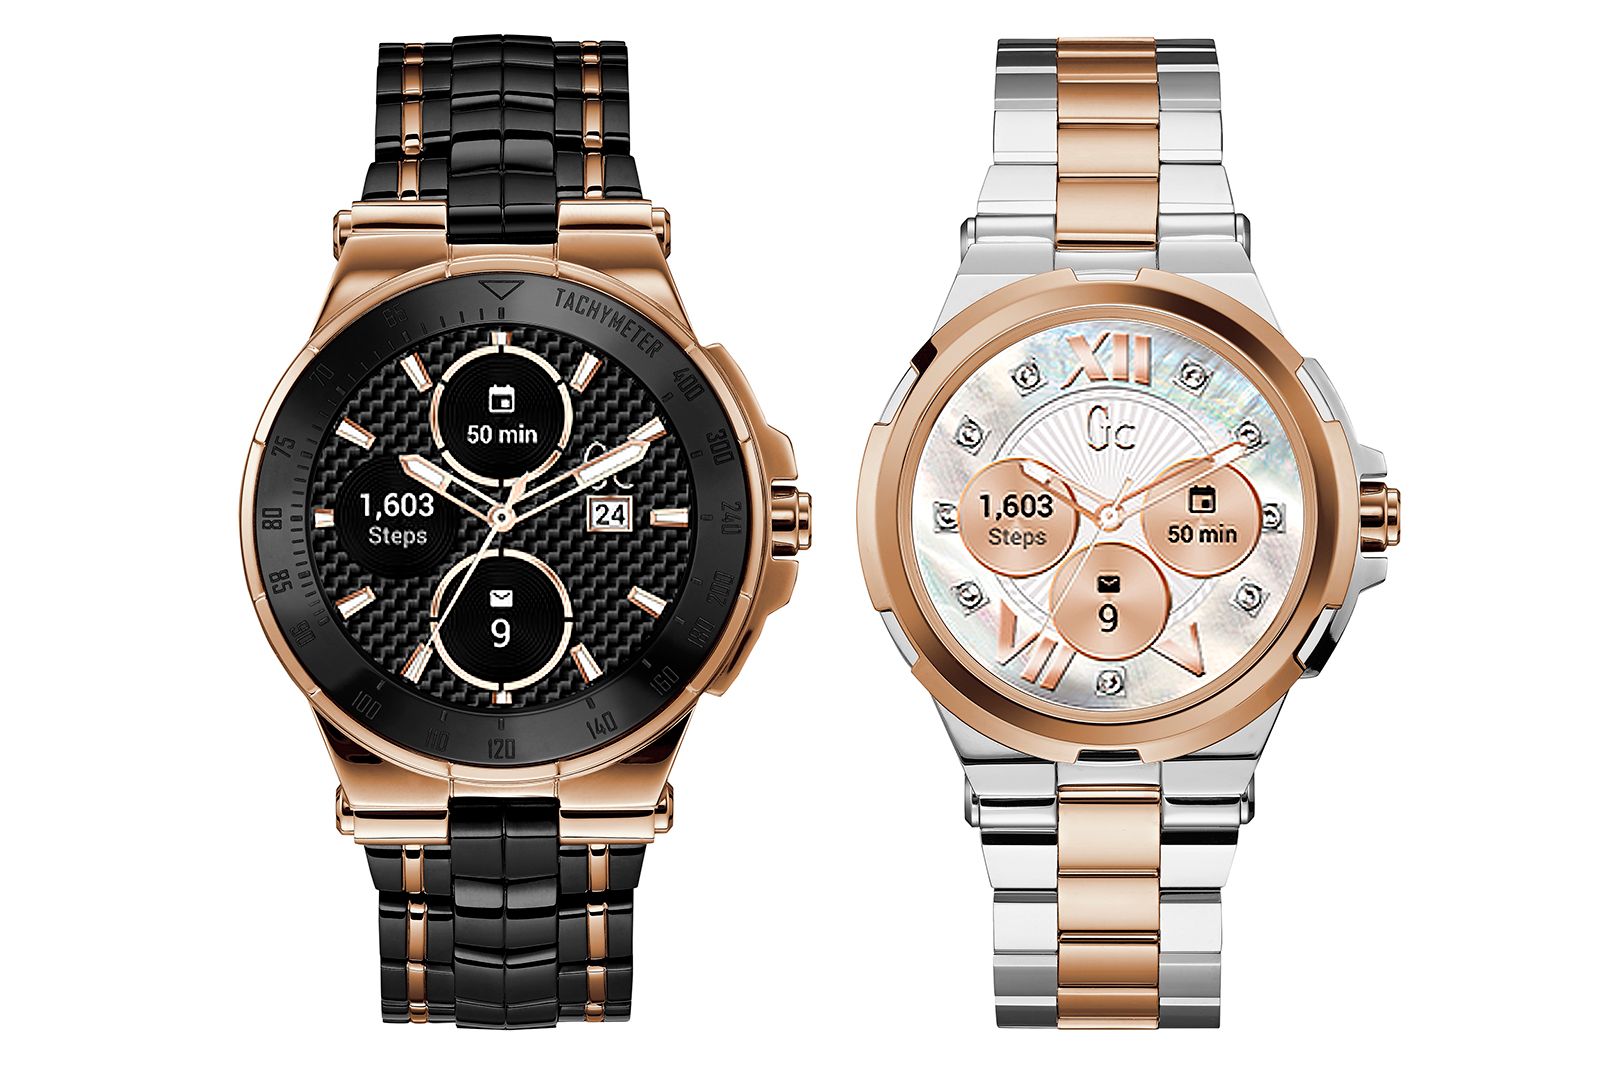 luxury swiss watch brand gc enters android wear 2 0 market with gc connect image 1